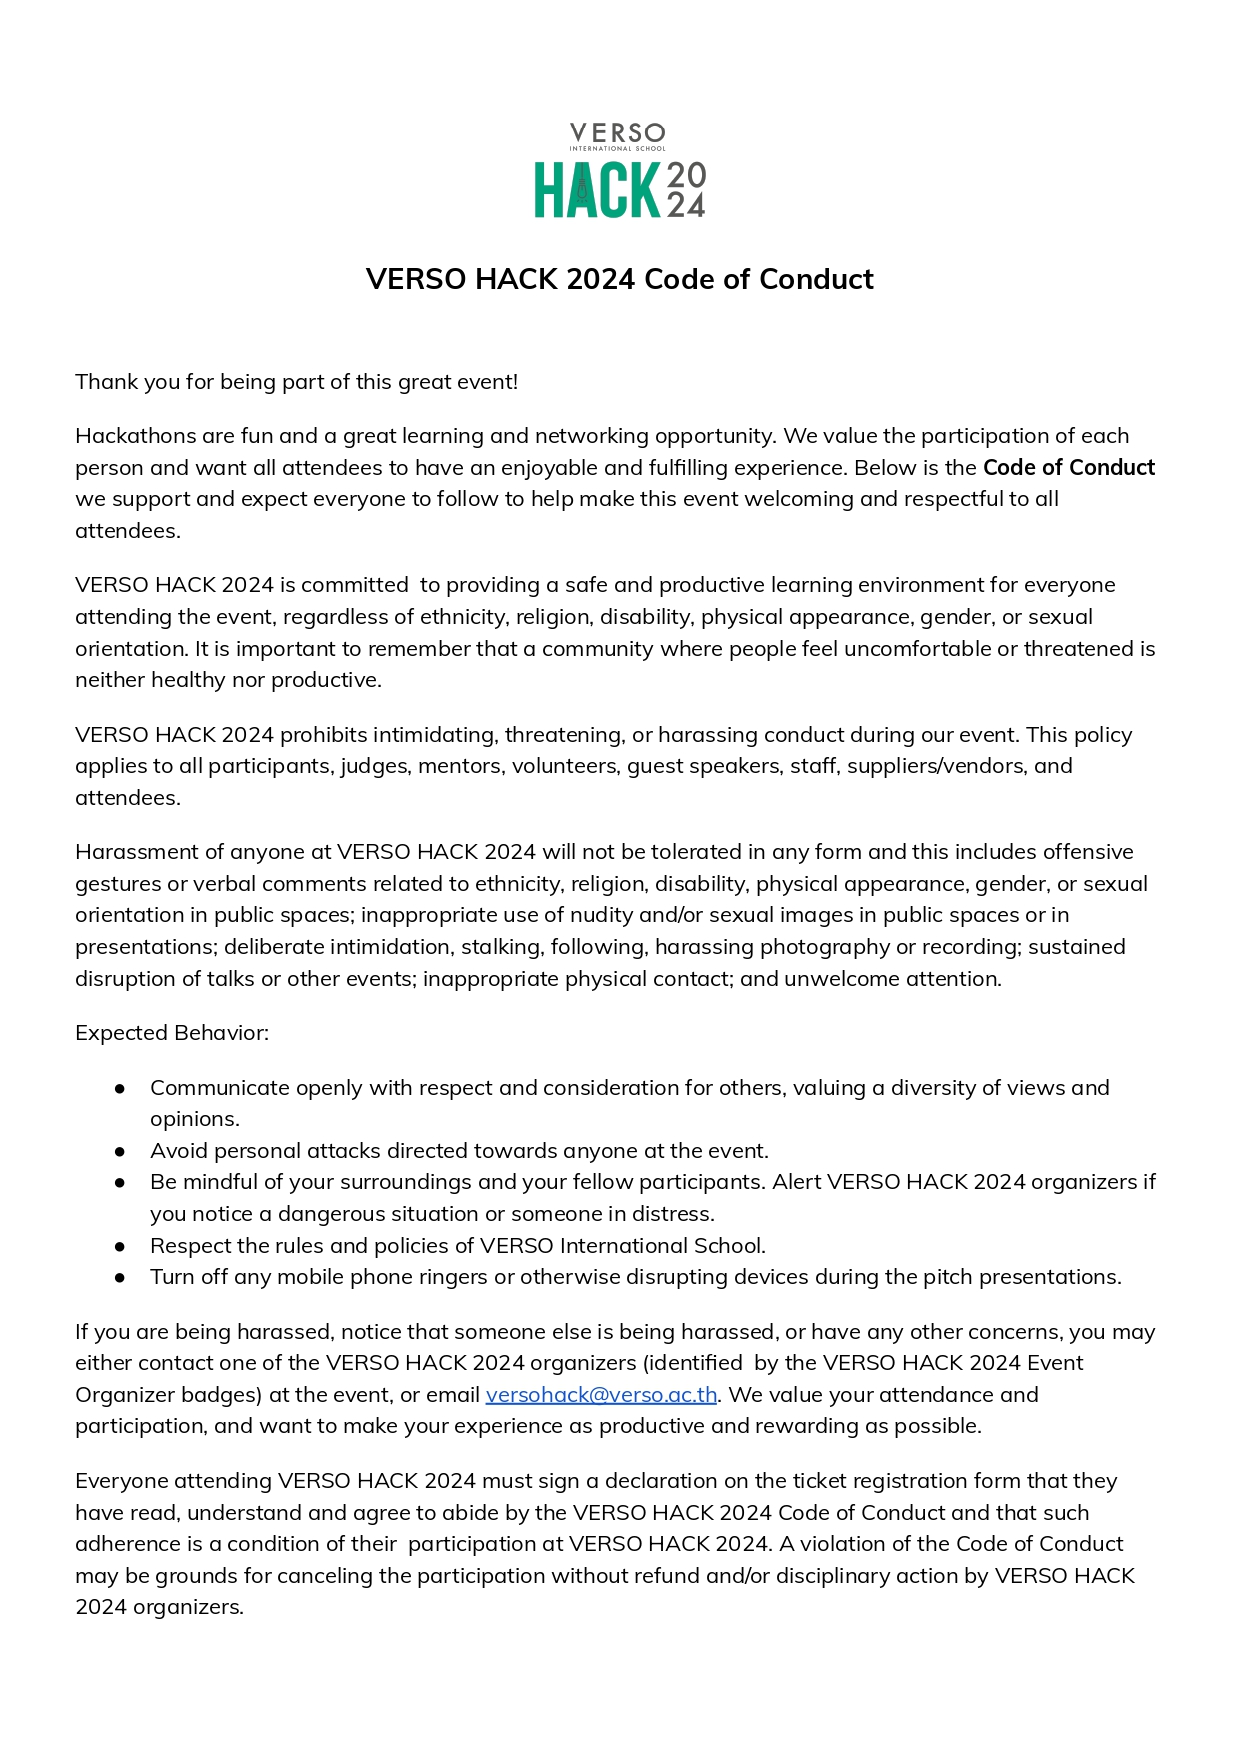 VERSO HACK 2024 Code of Conduct